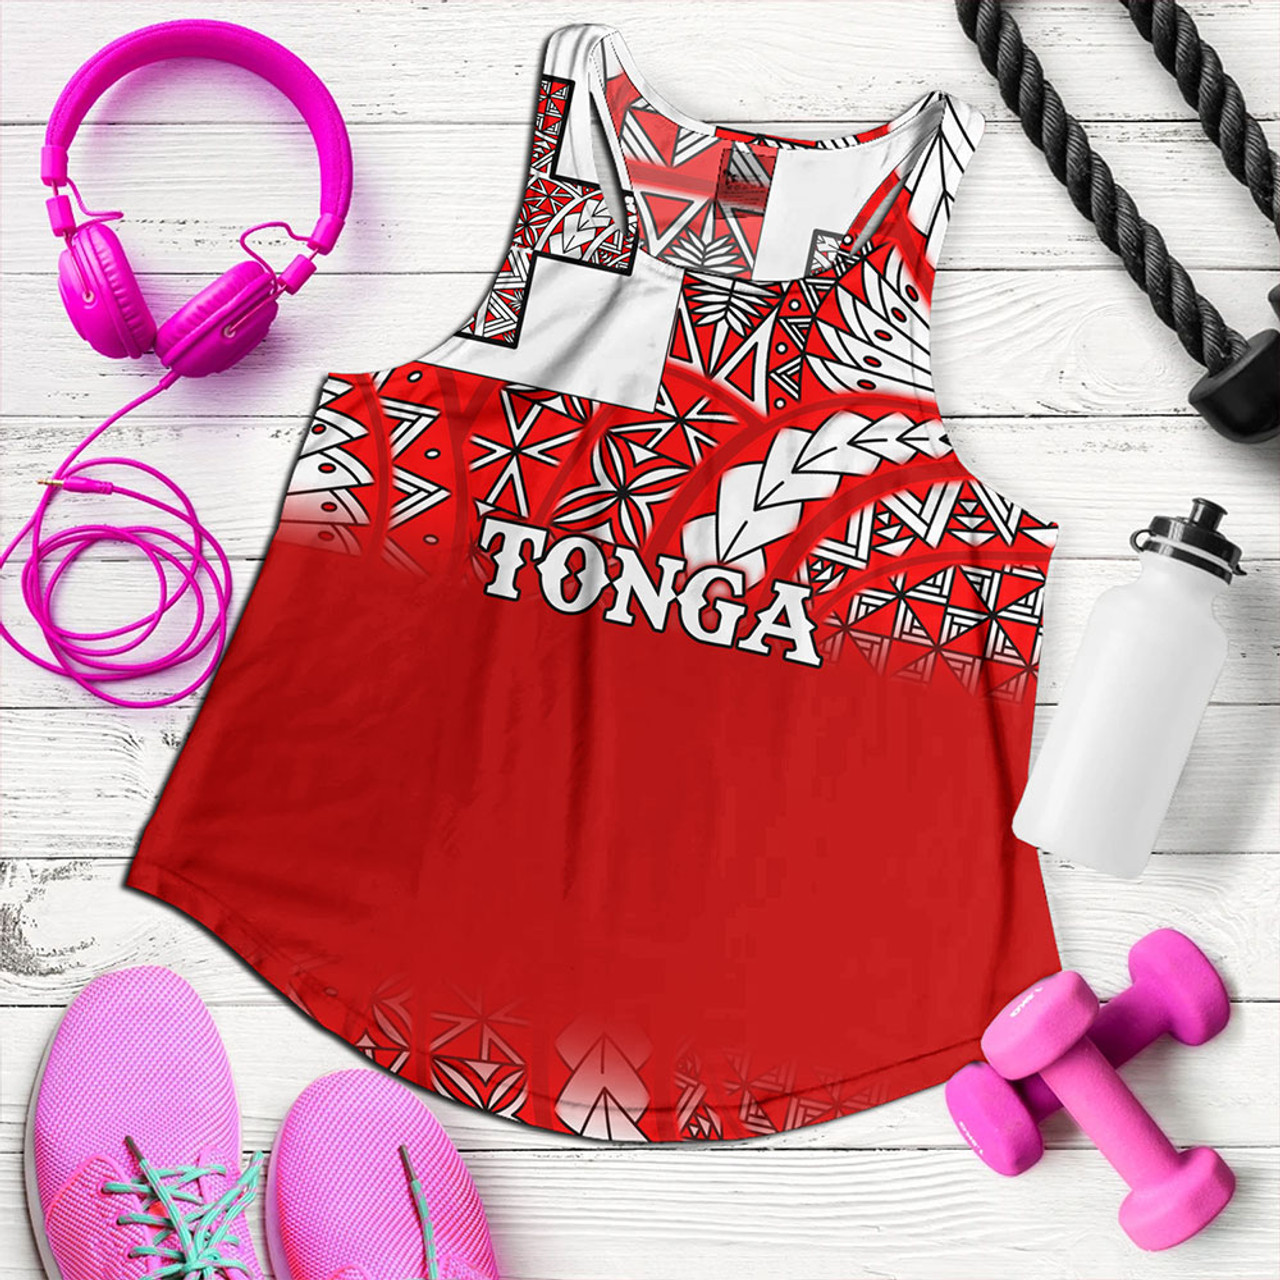 Tonga Women Tank - Tonga Flag Color With Traditional Patterns